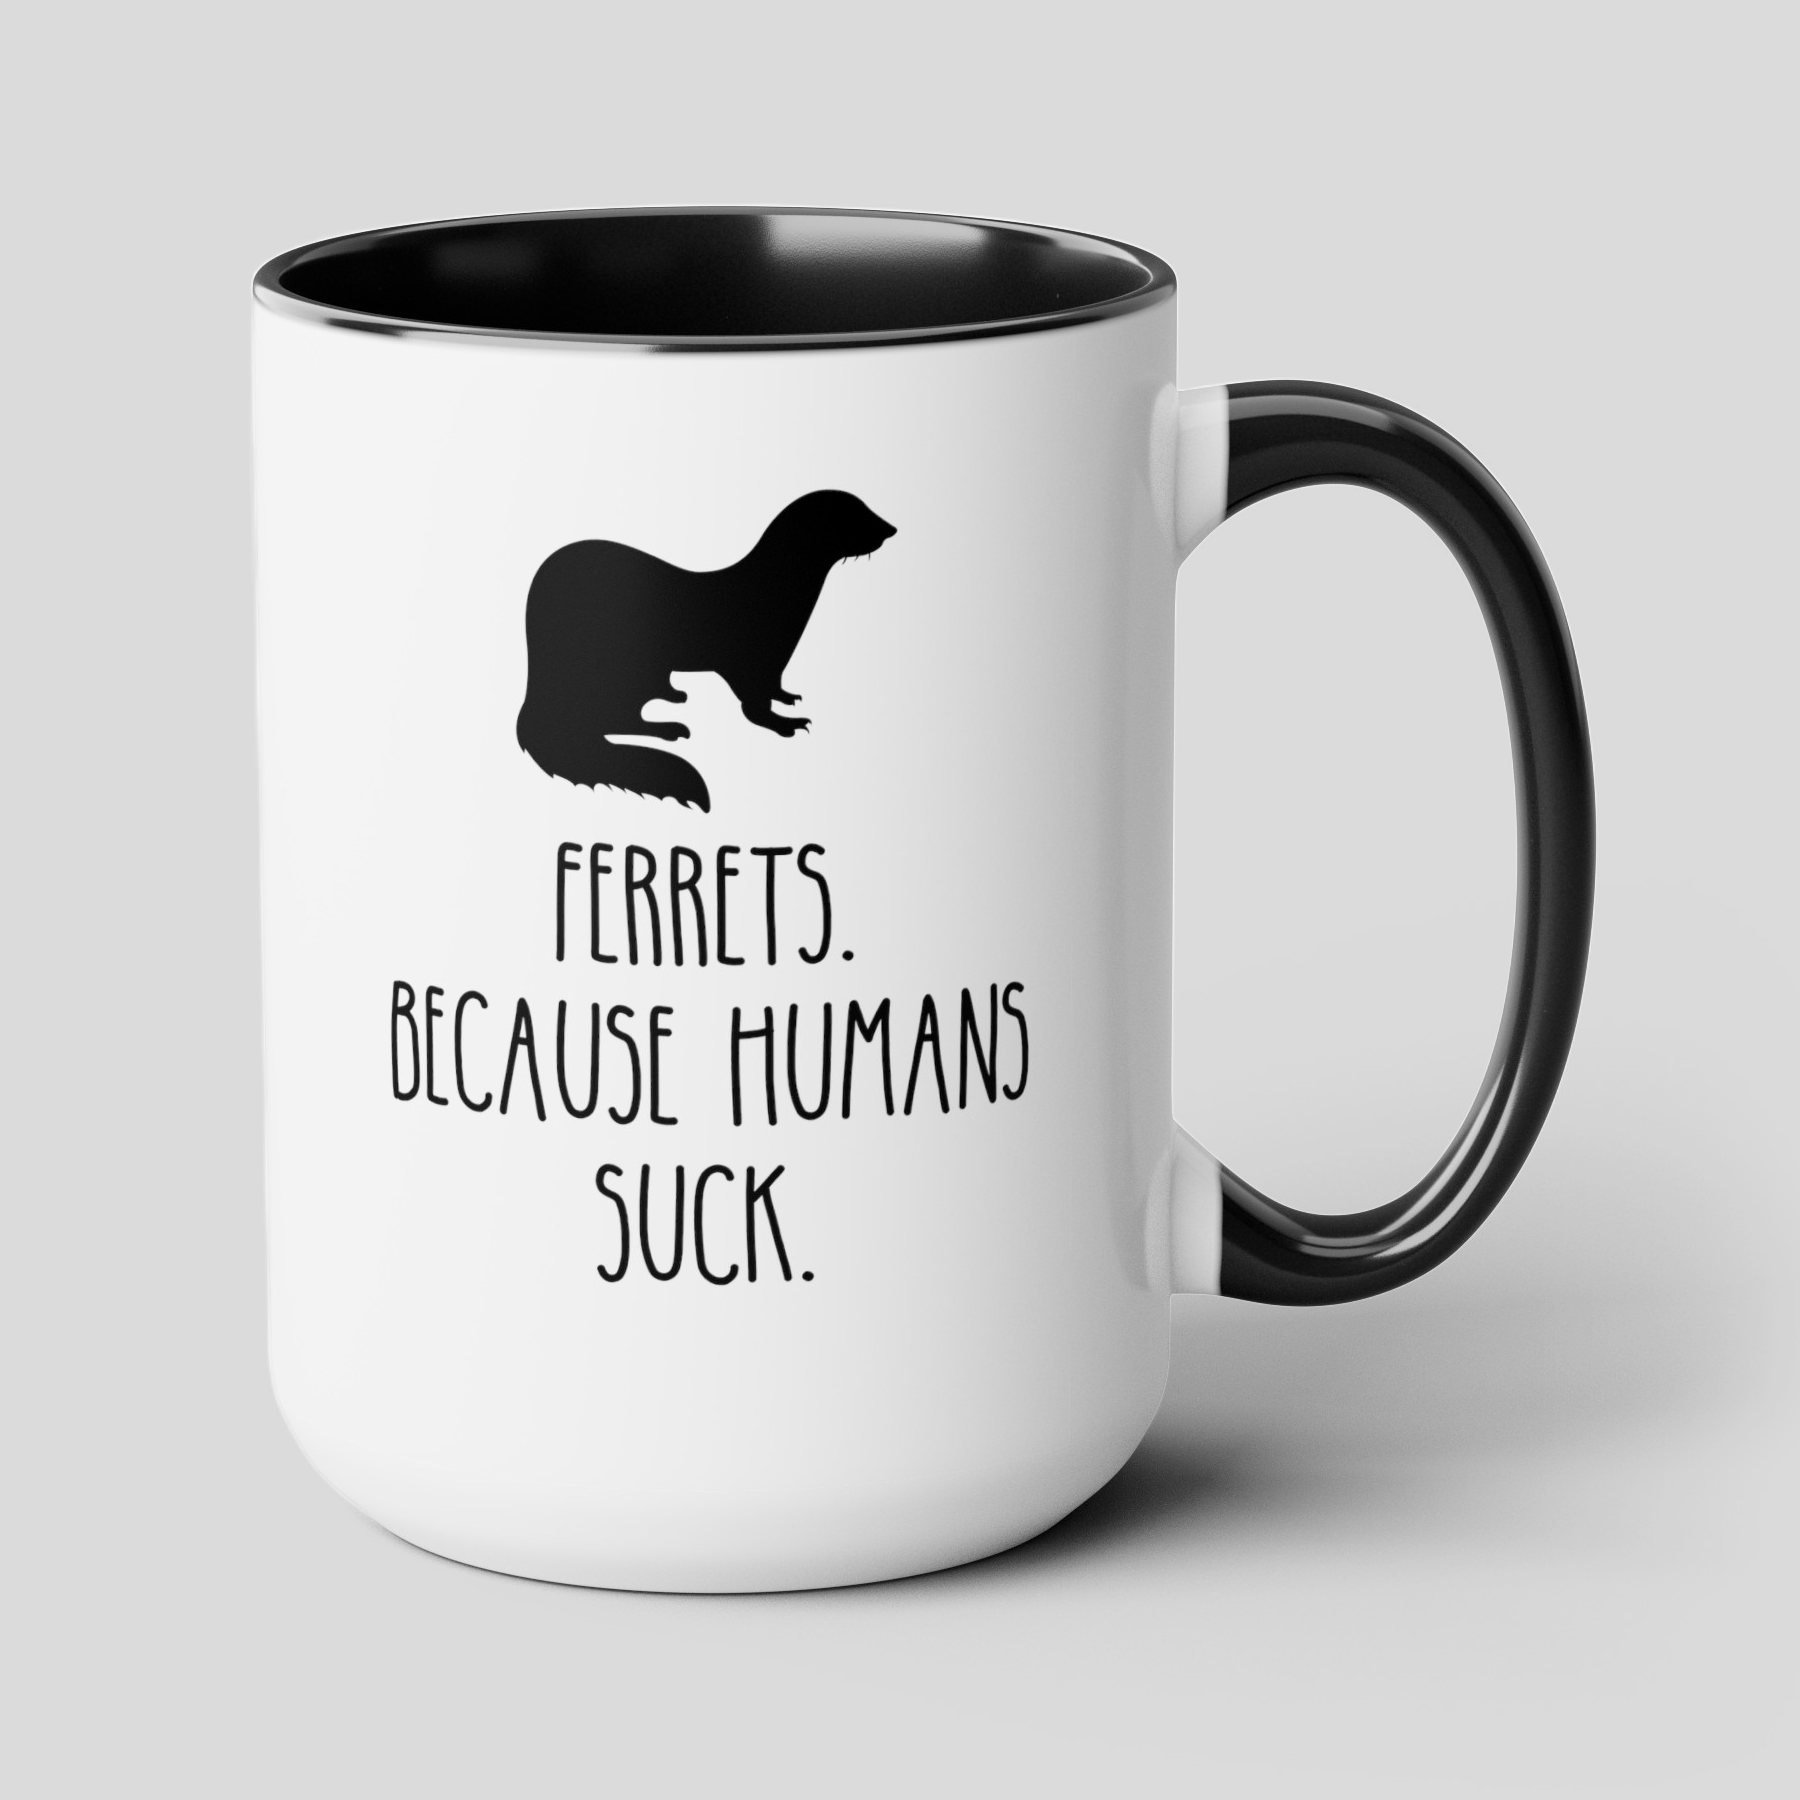 Ferrets Because Humans Suck 15oz white with black accent funny large coffee mug gift for cute ferret mom lover owner waveywares wavey wares wavywares wavy wares cover